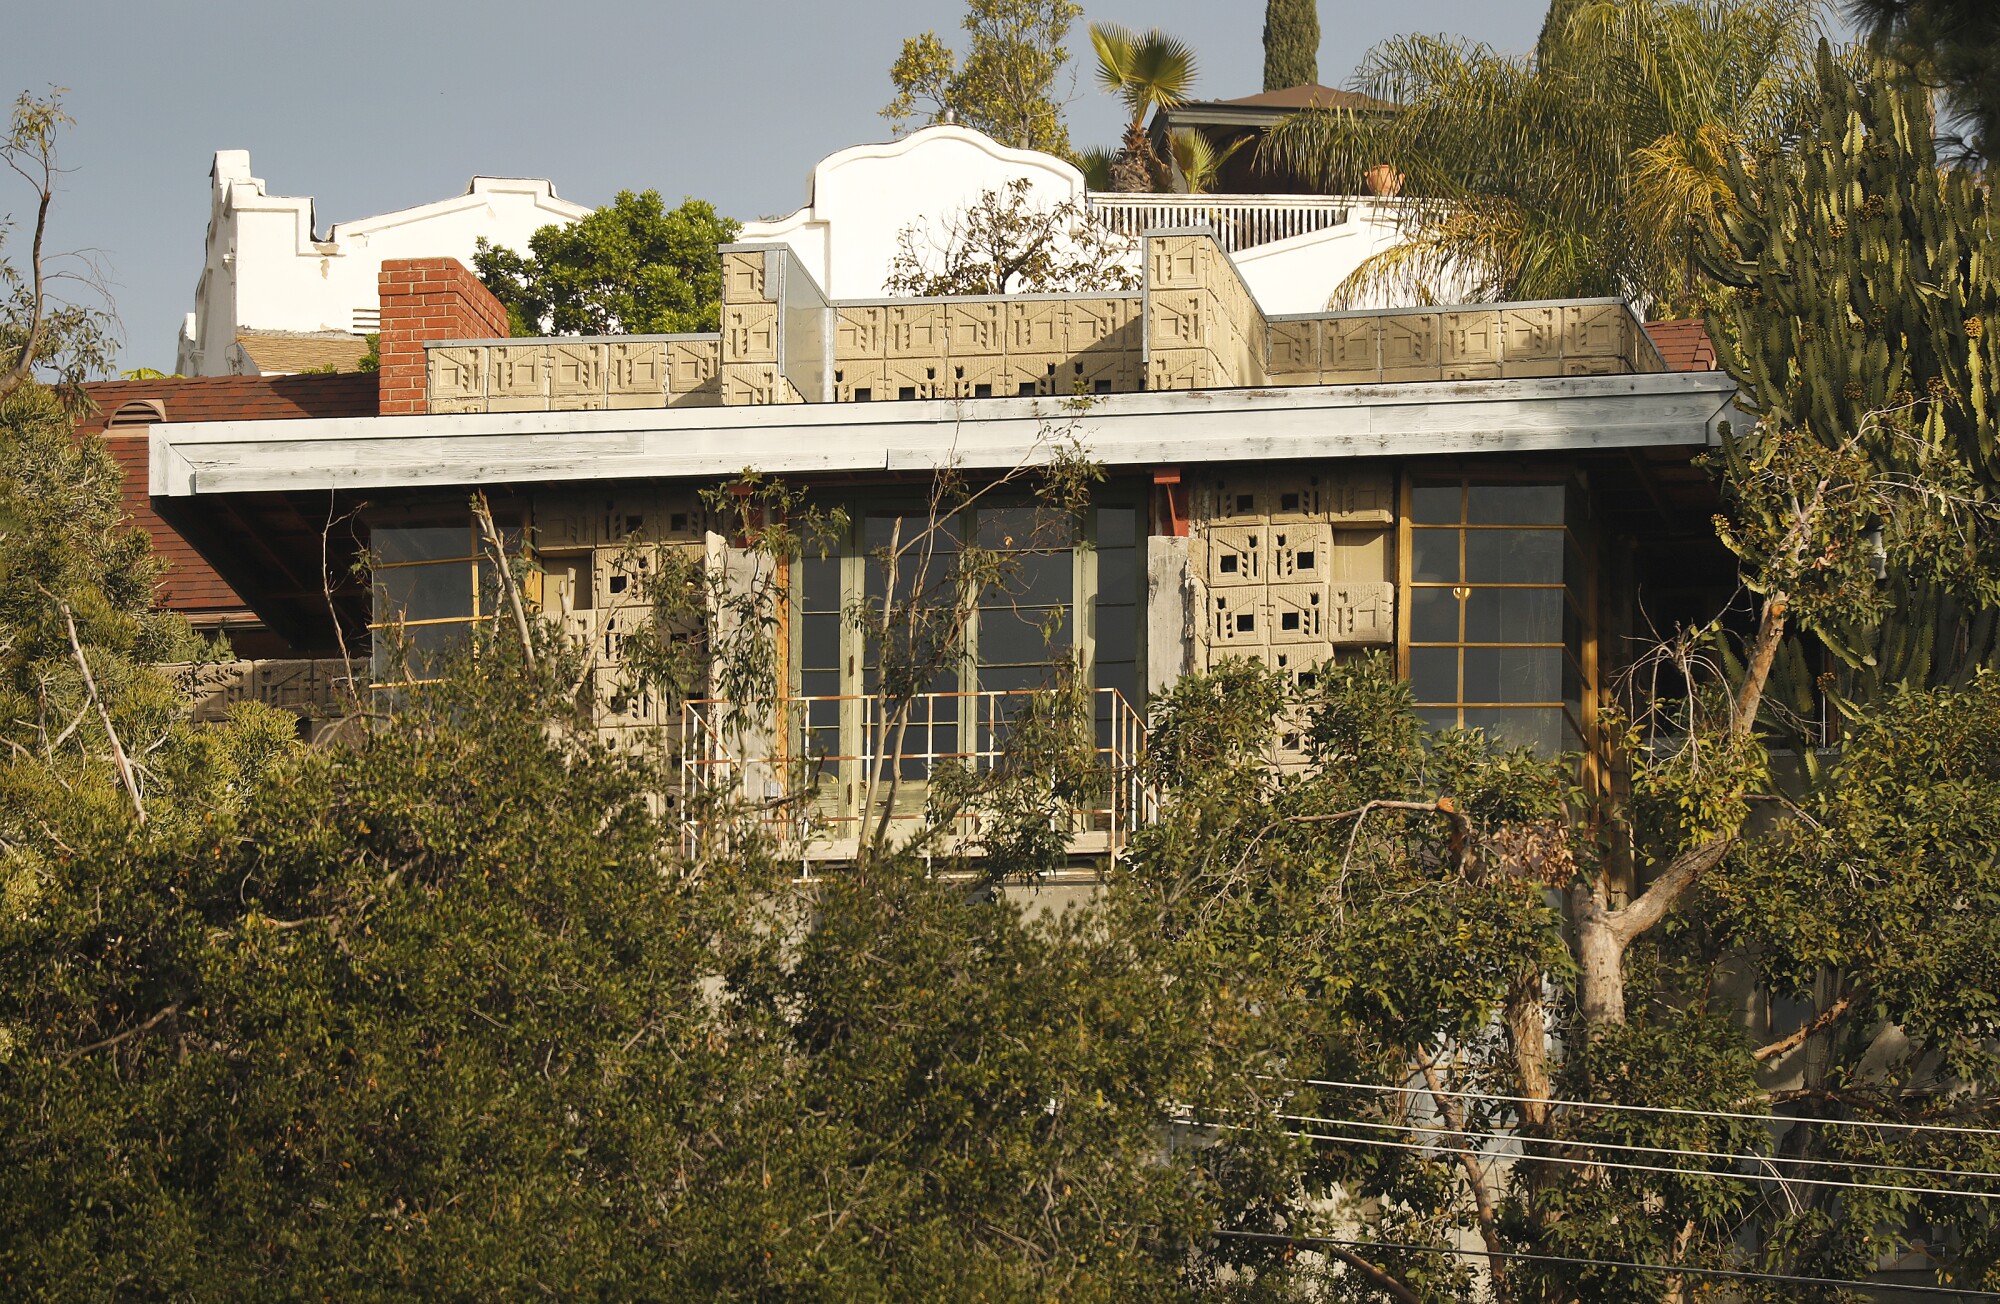 The sun shines on the textile-block front facade of Frank Lloyd Wright's Freeman House in the Hollywood HIlls.